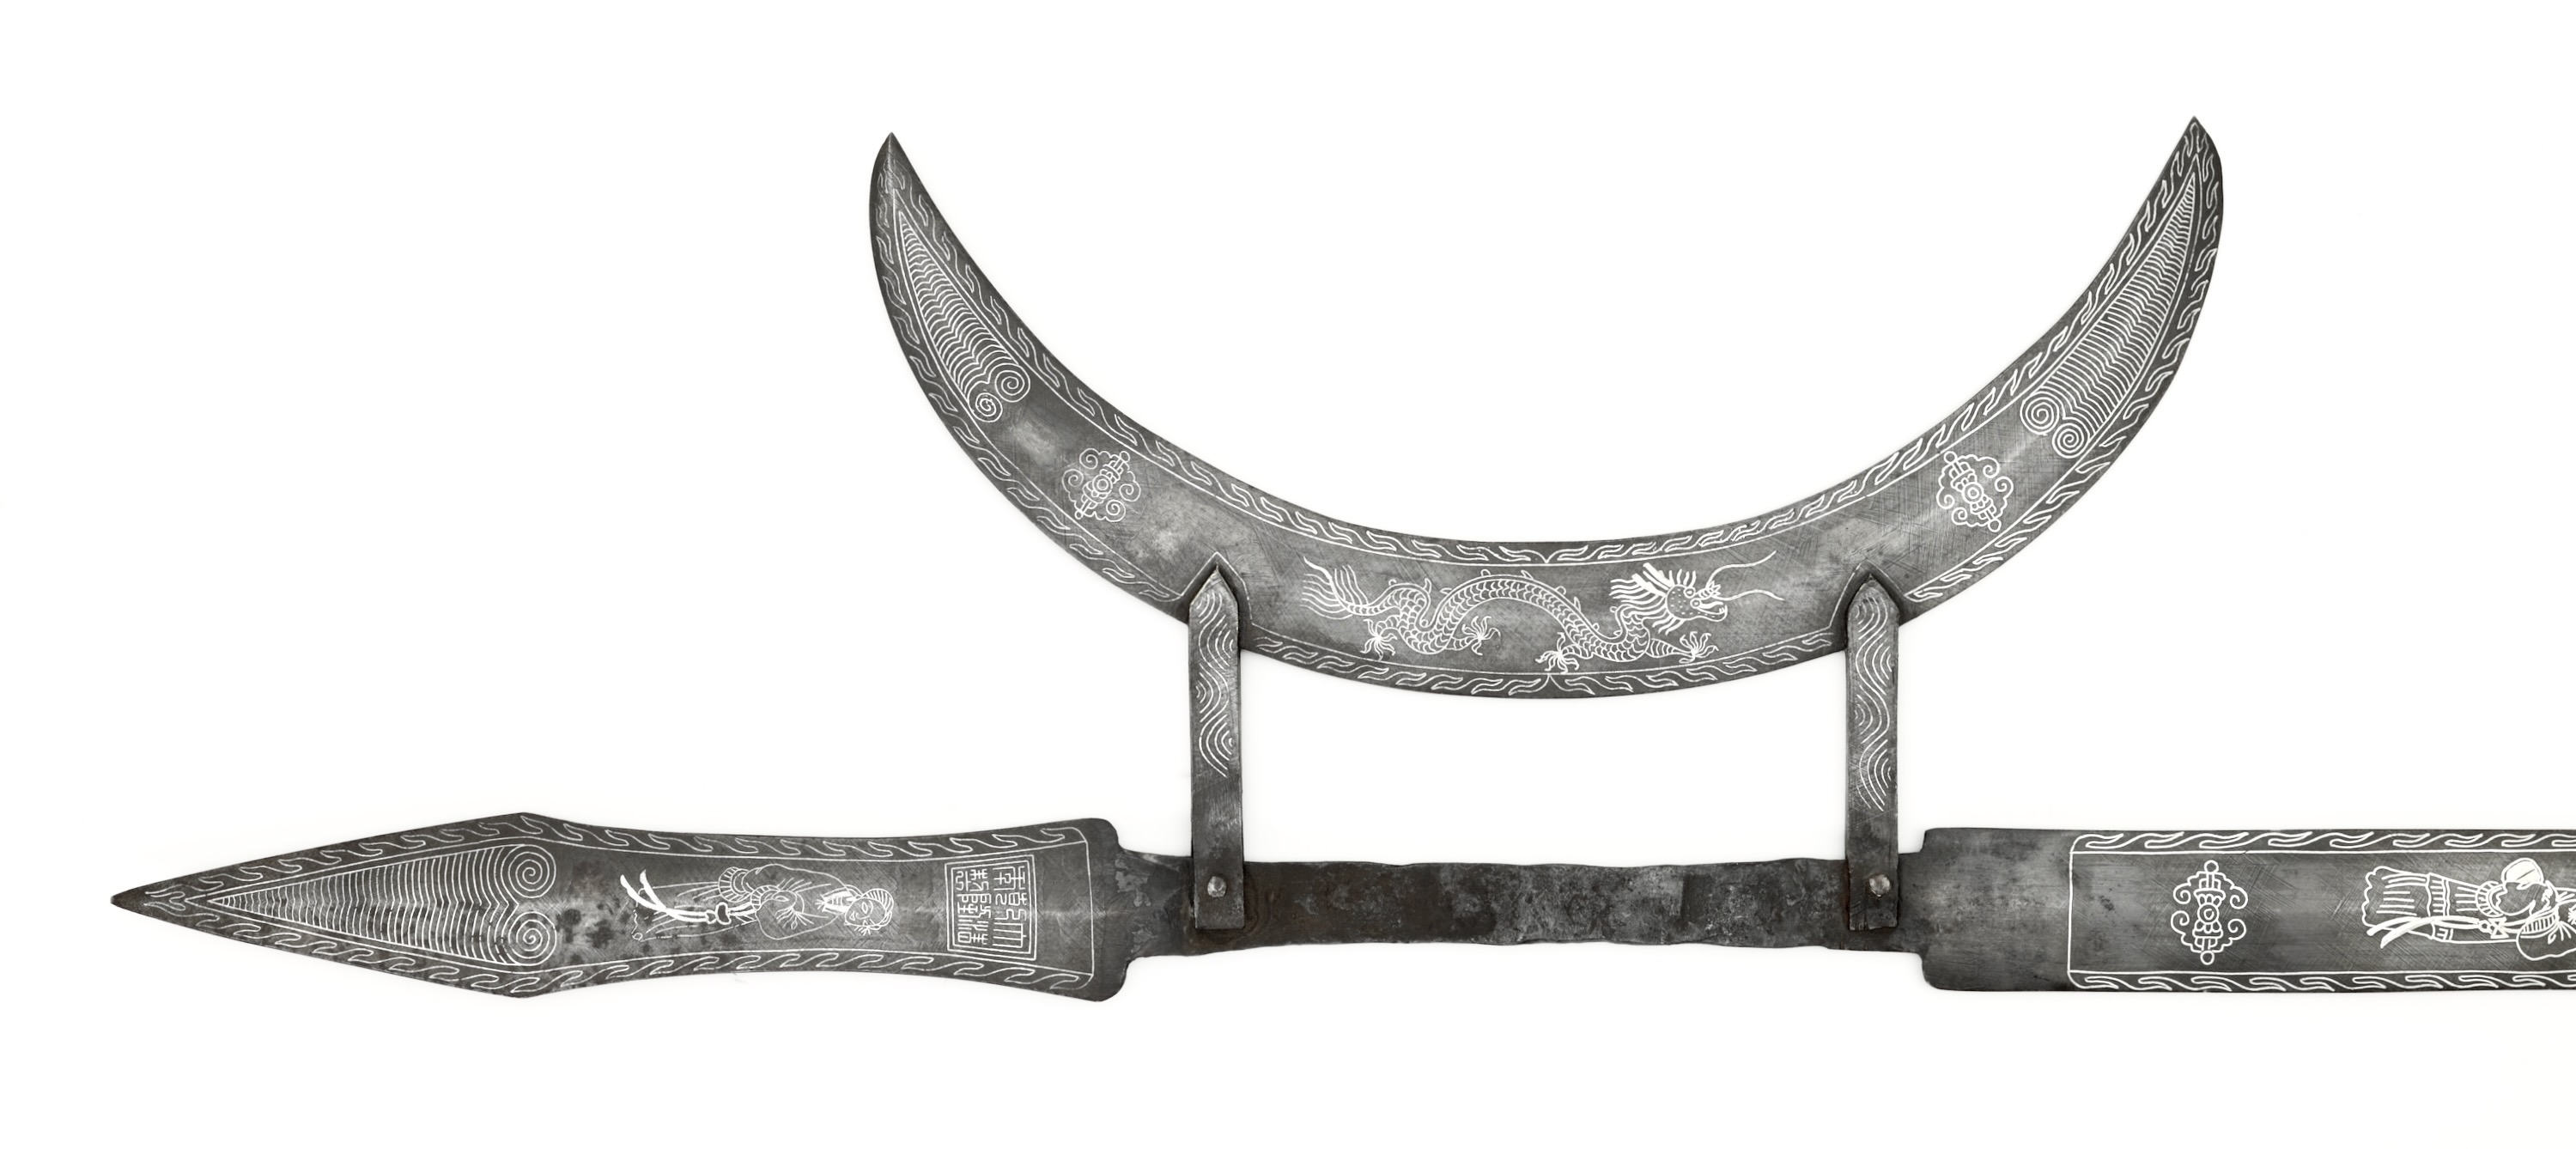 Chinese silver overlaid hook sword